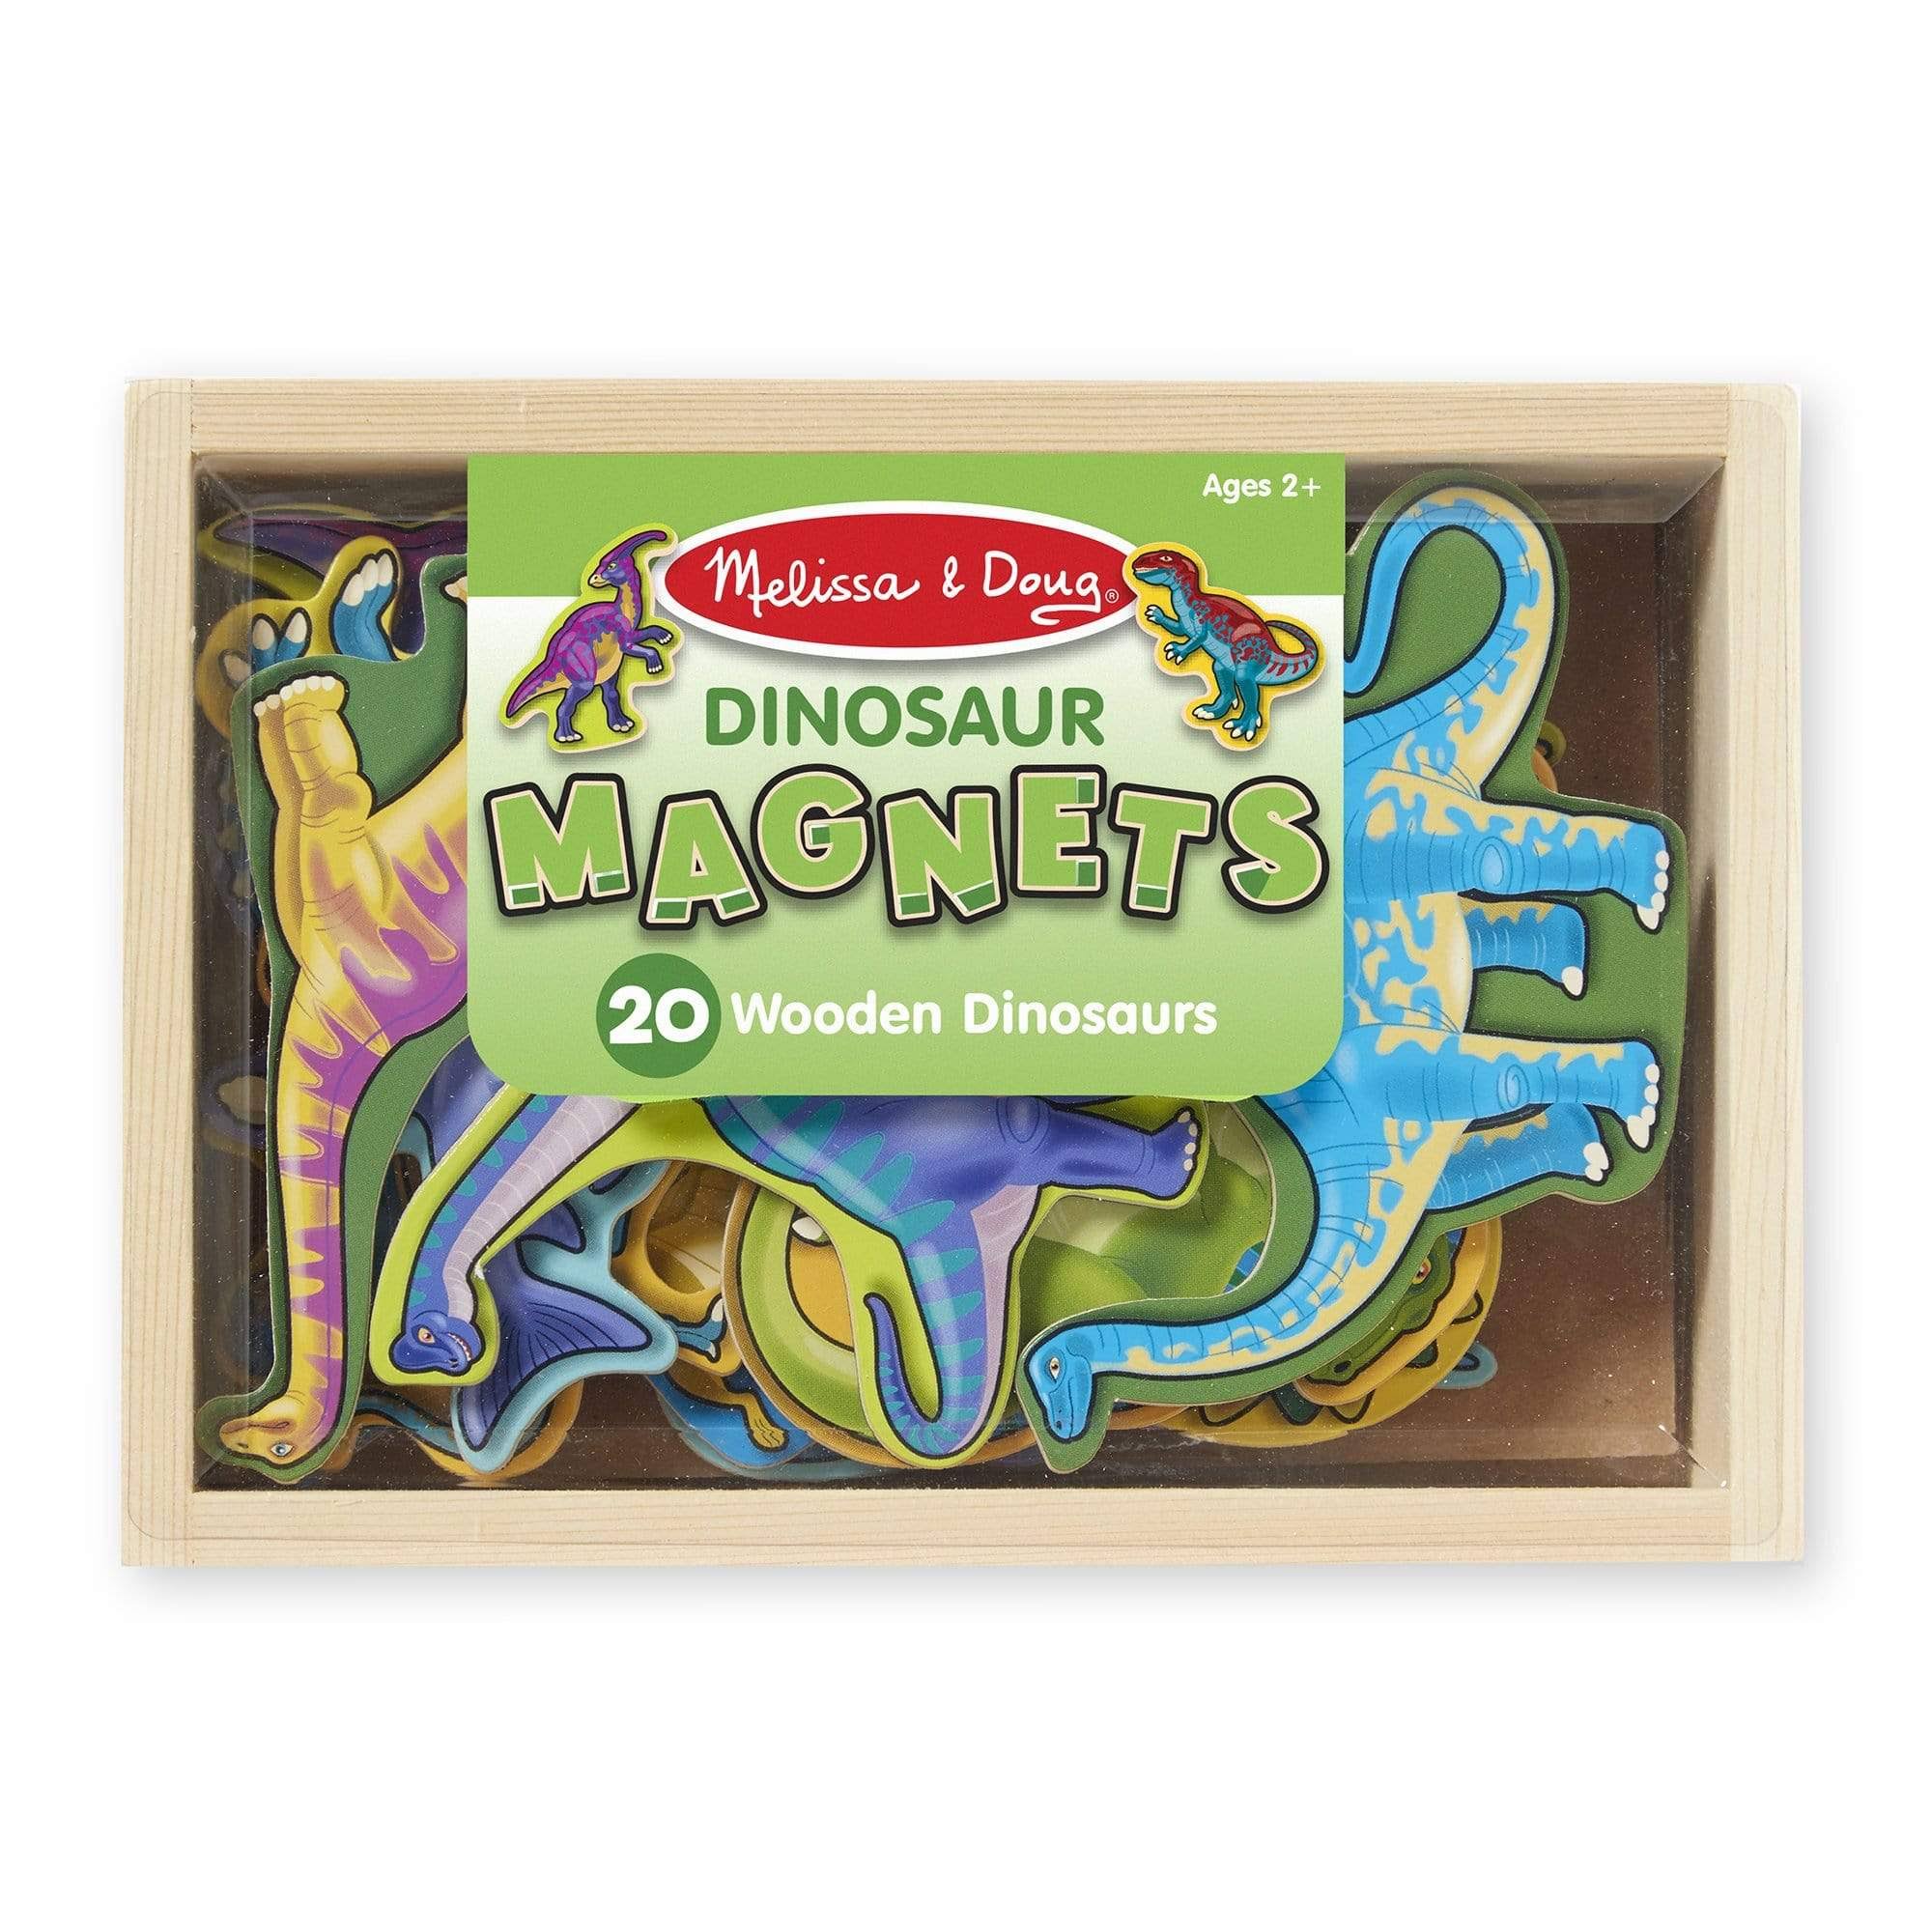 Melissa & Doug Magnetic Wooden Dinosaurs in A Box